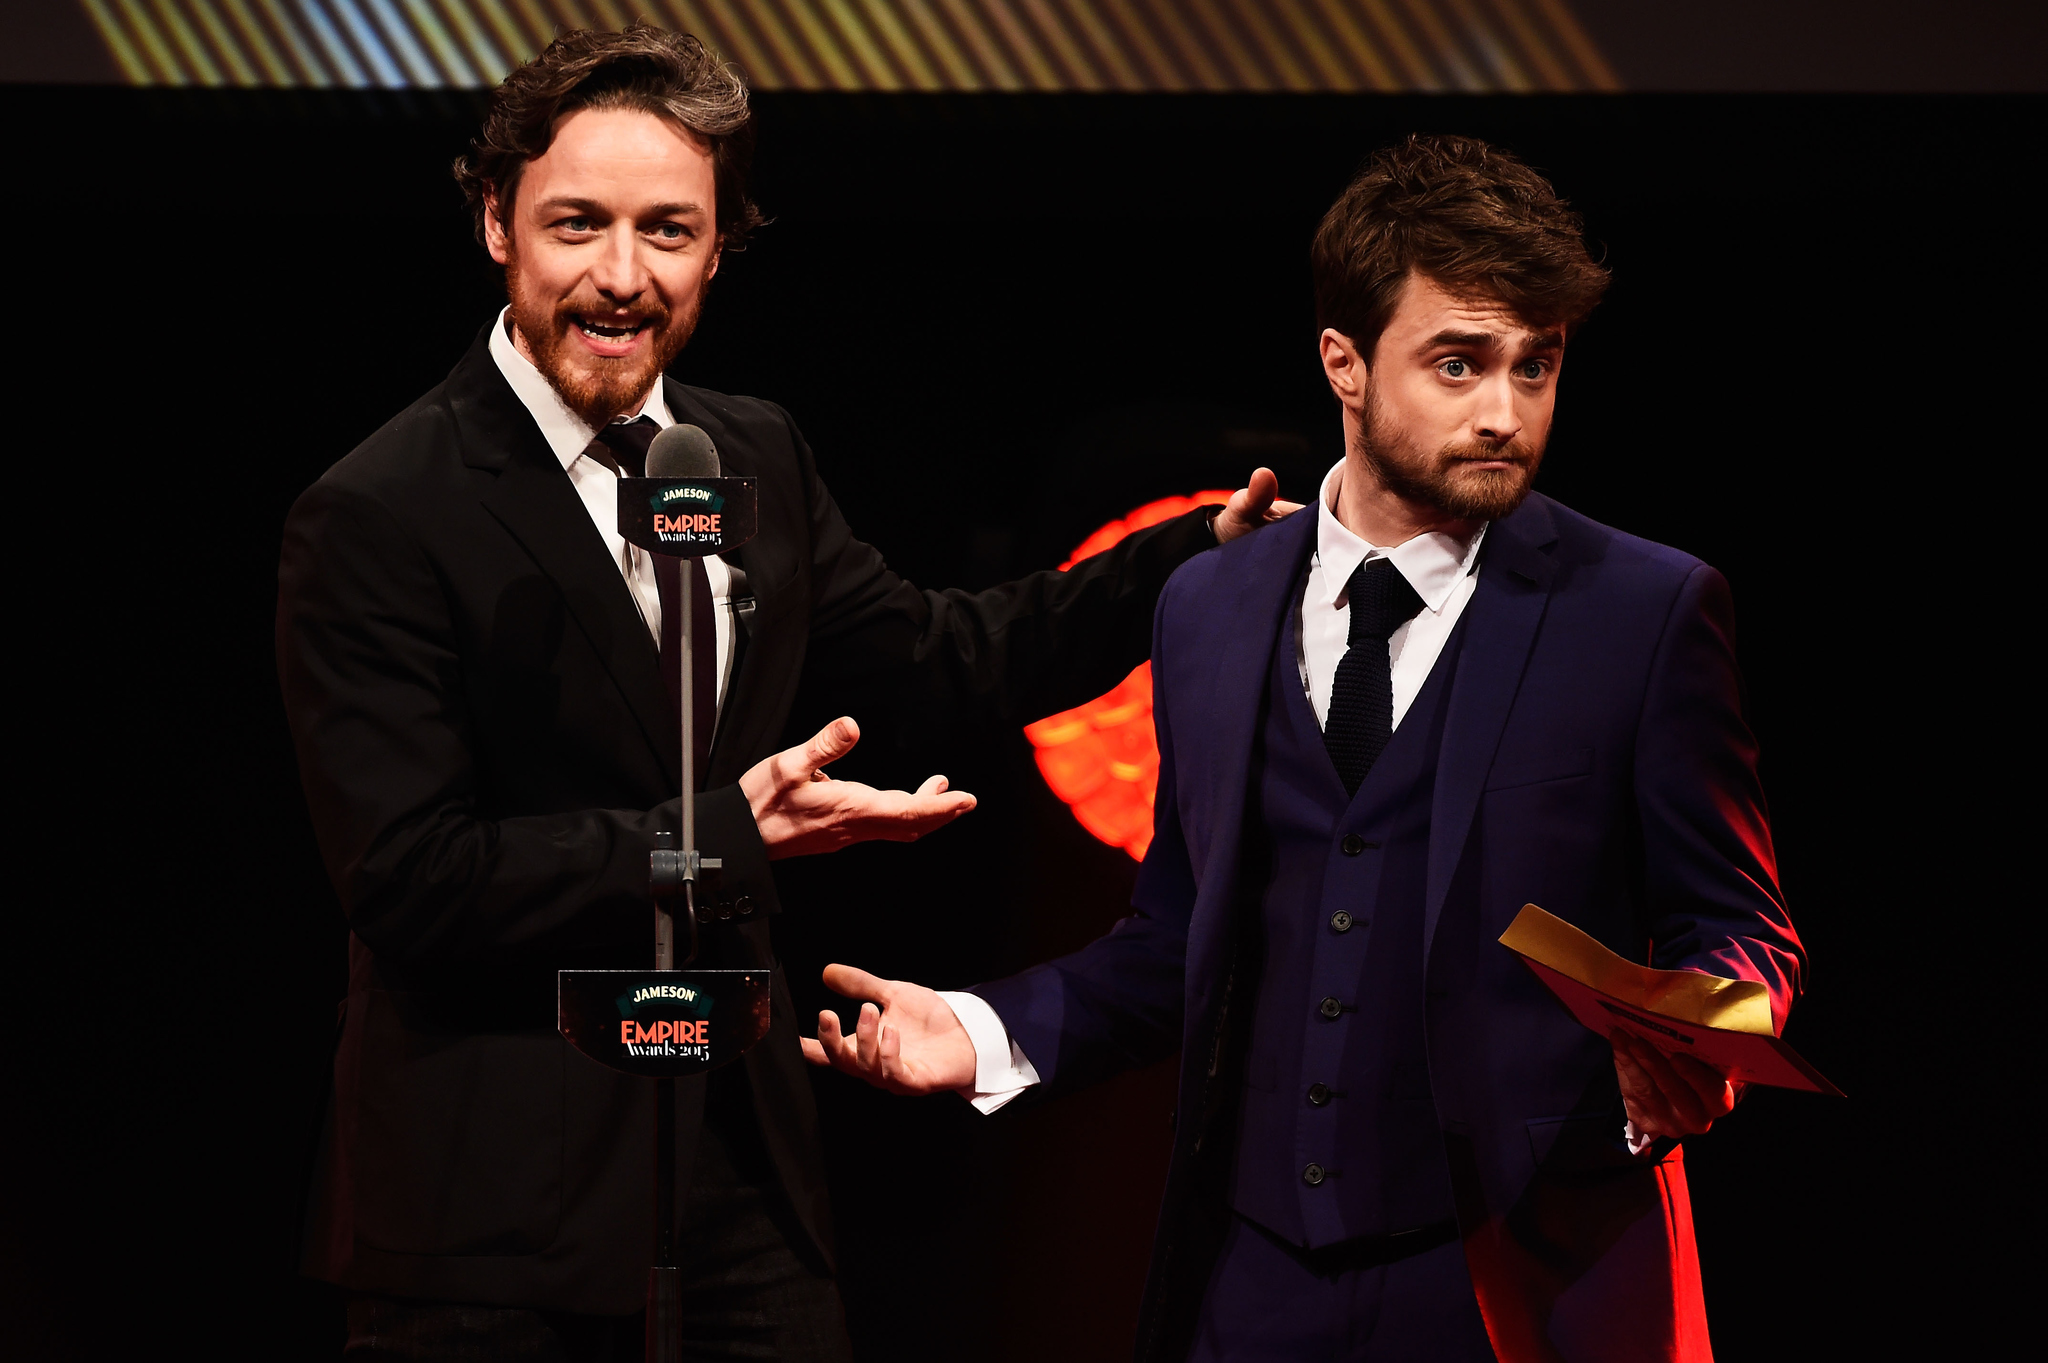 James McAvoy and Daniel Radcliffe